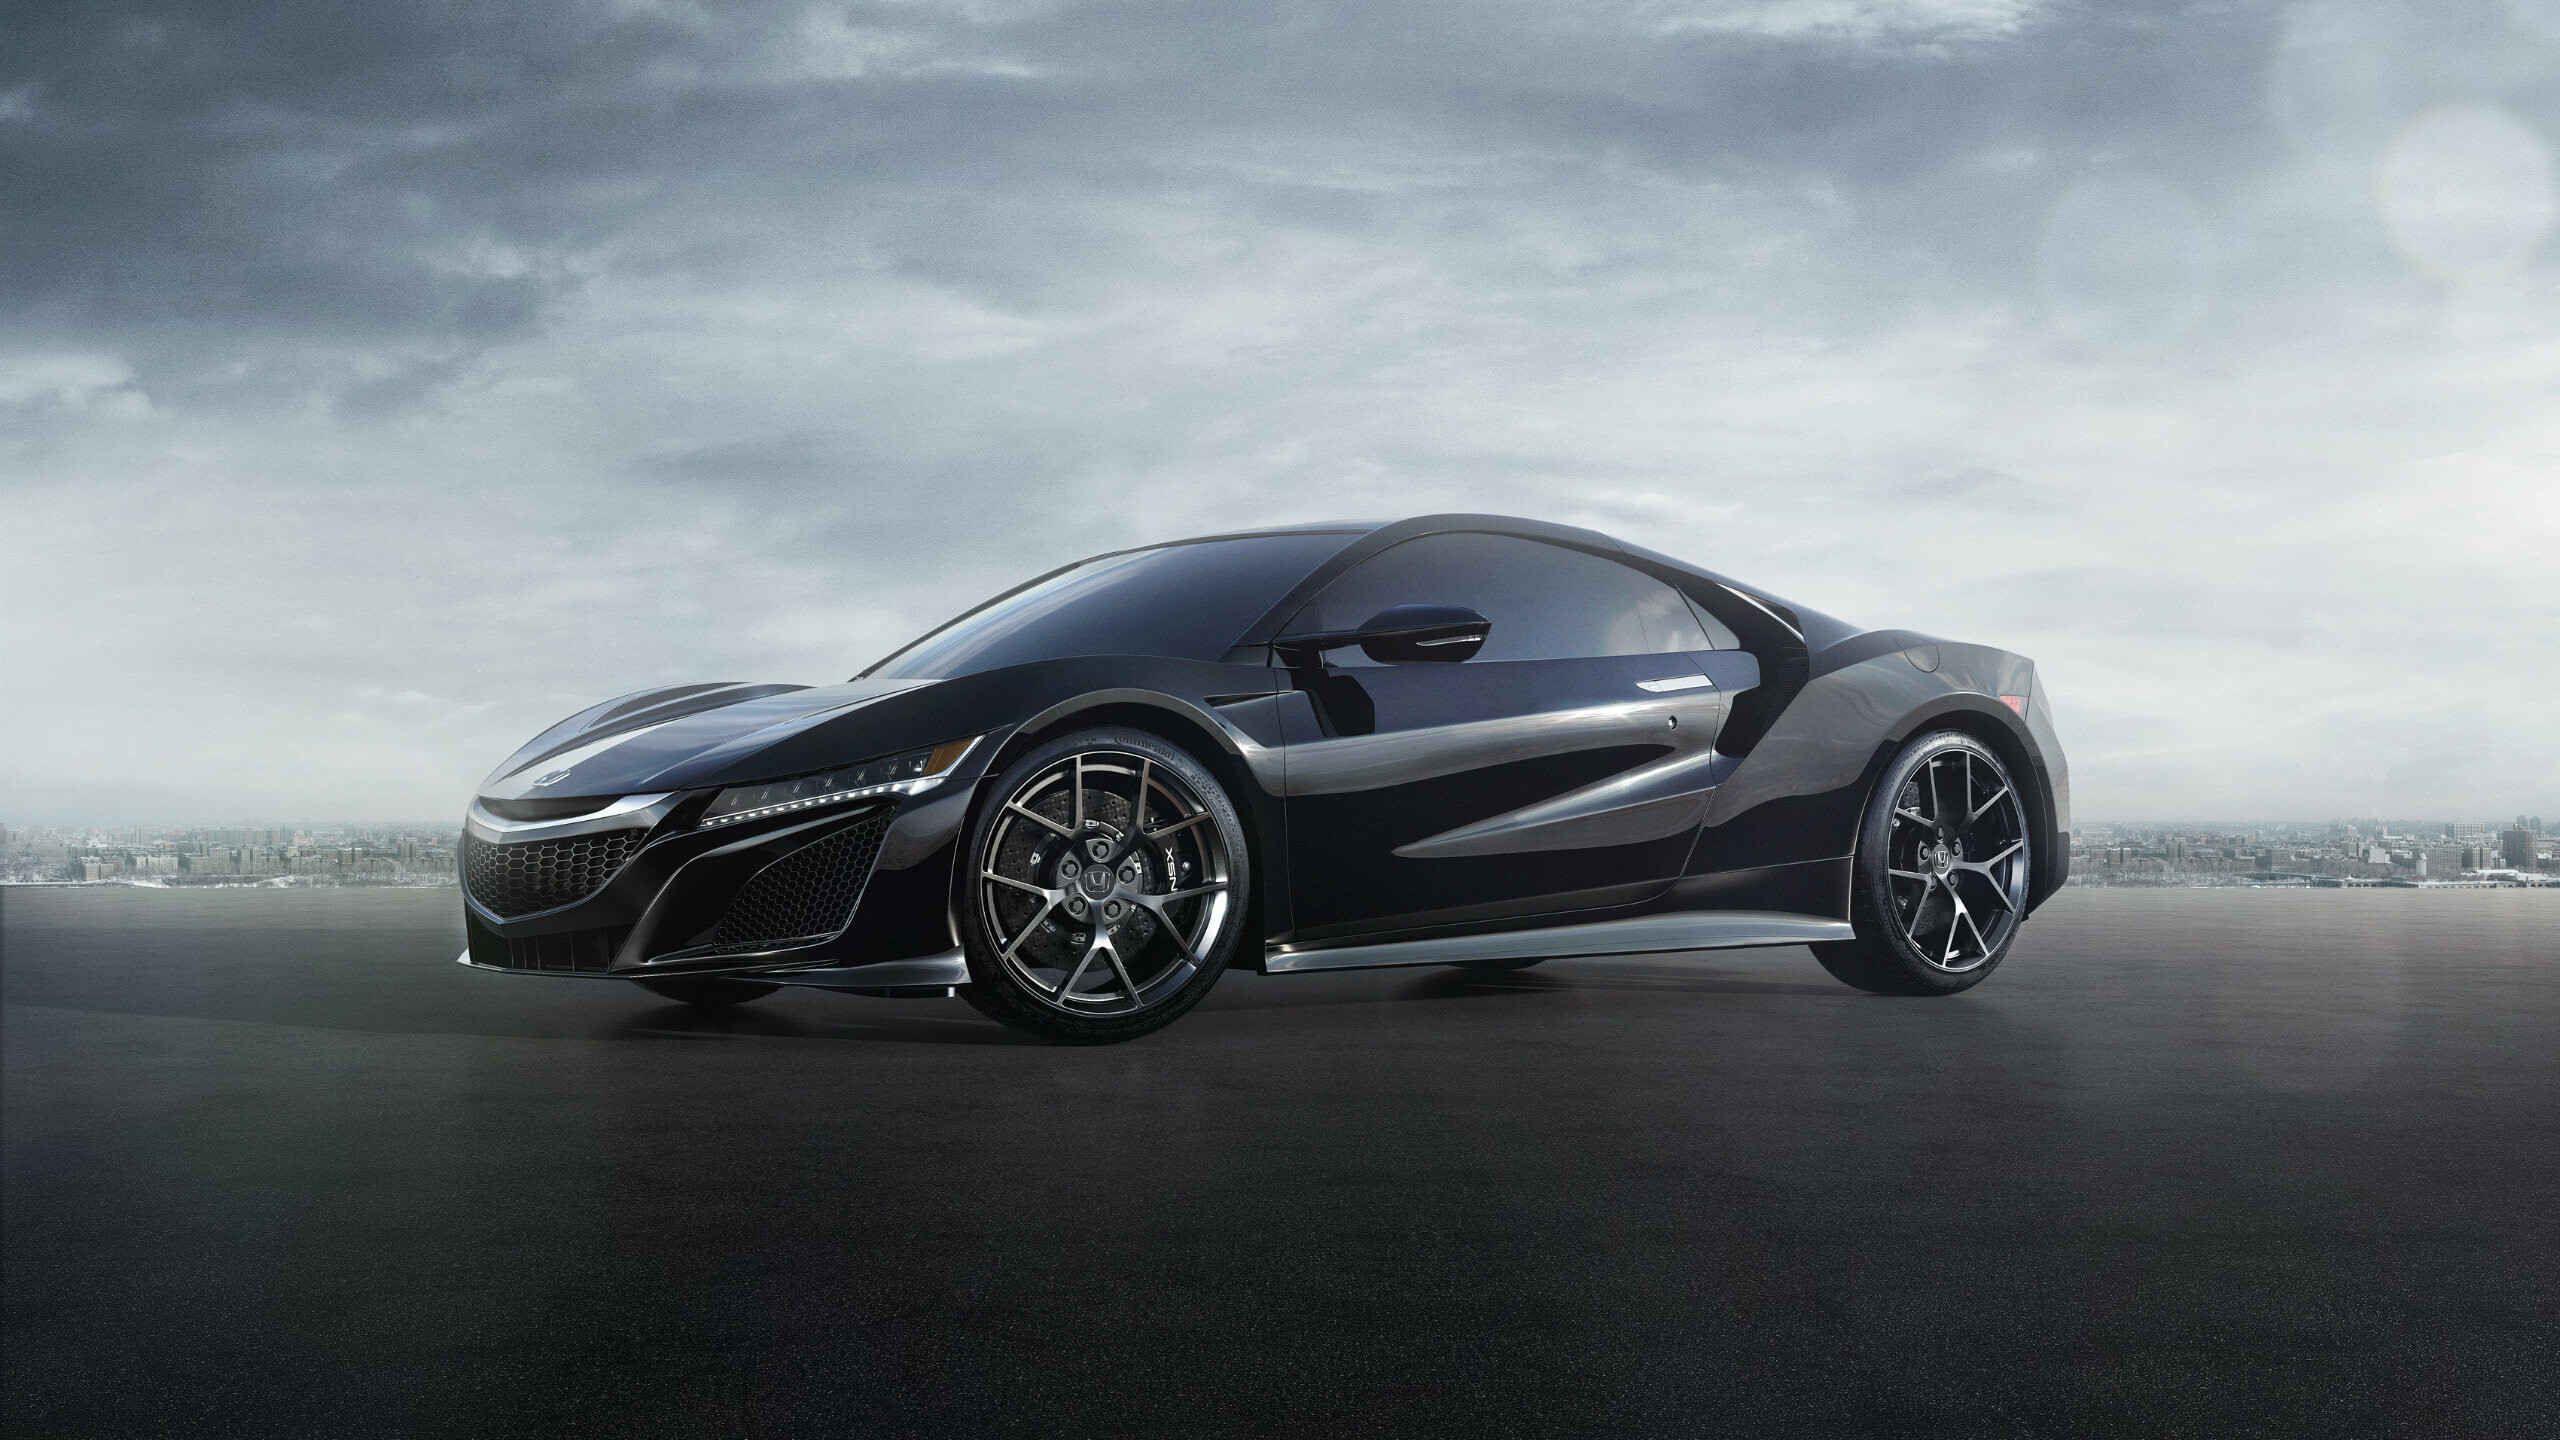 Acura: Produces a lineup of premium vehicles generally known for their sporty handling, NSX. 2560x1440 HD Wallpaper.